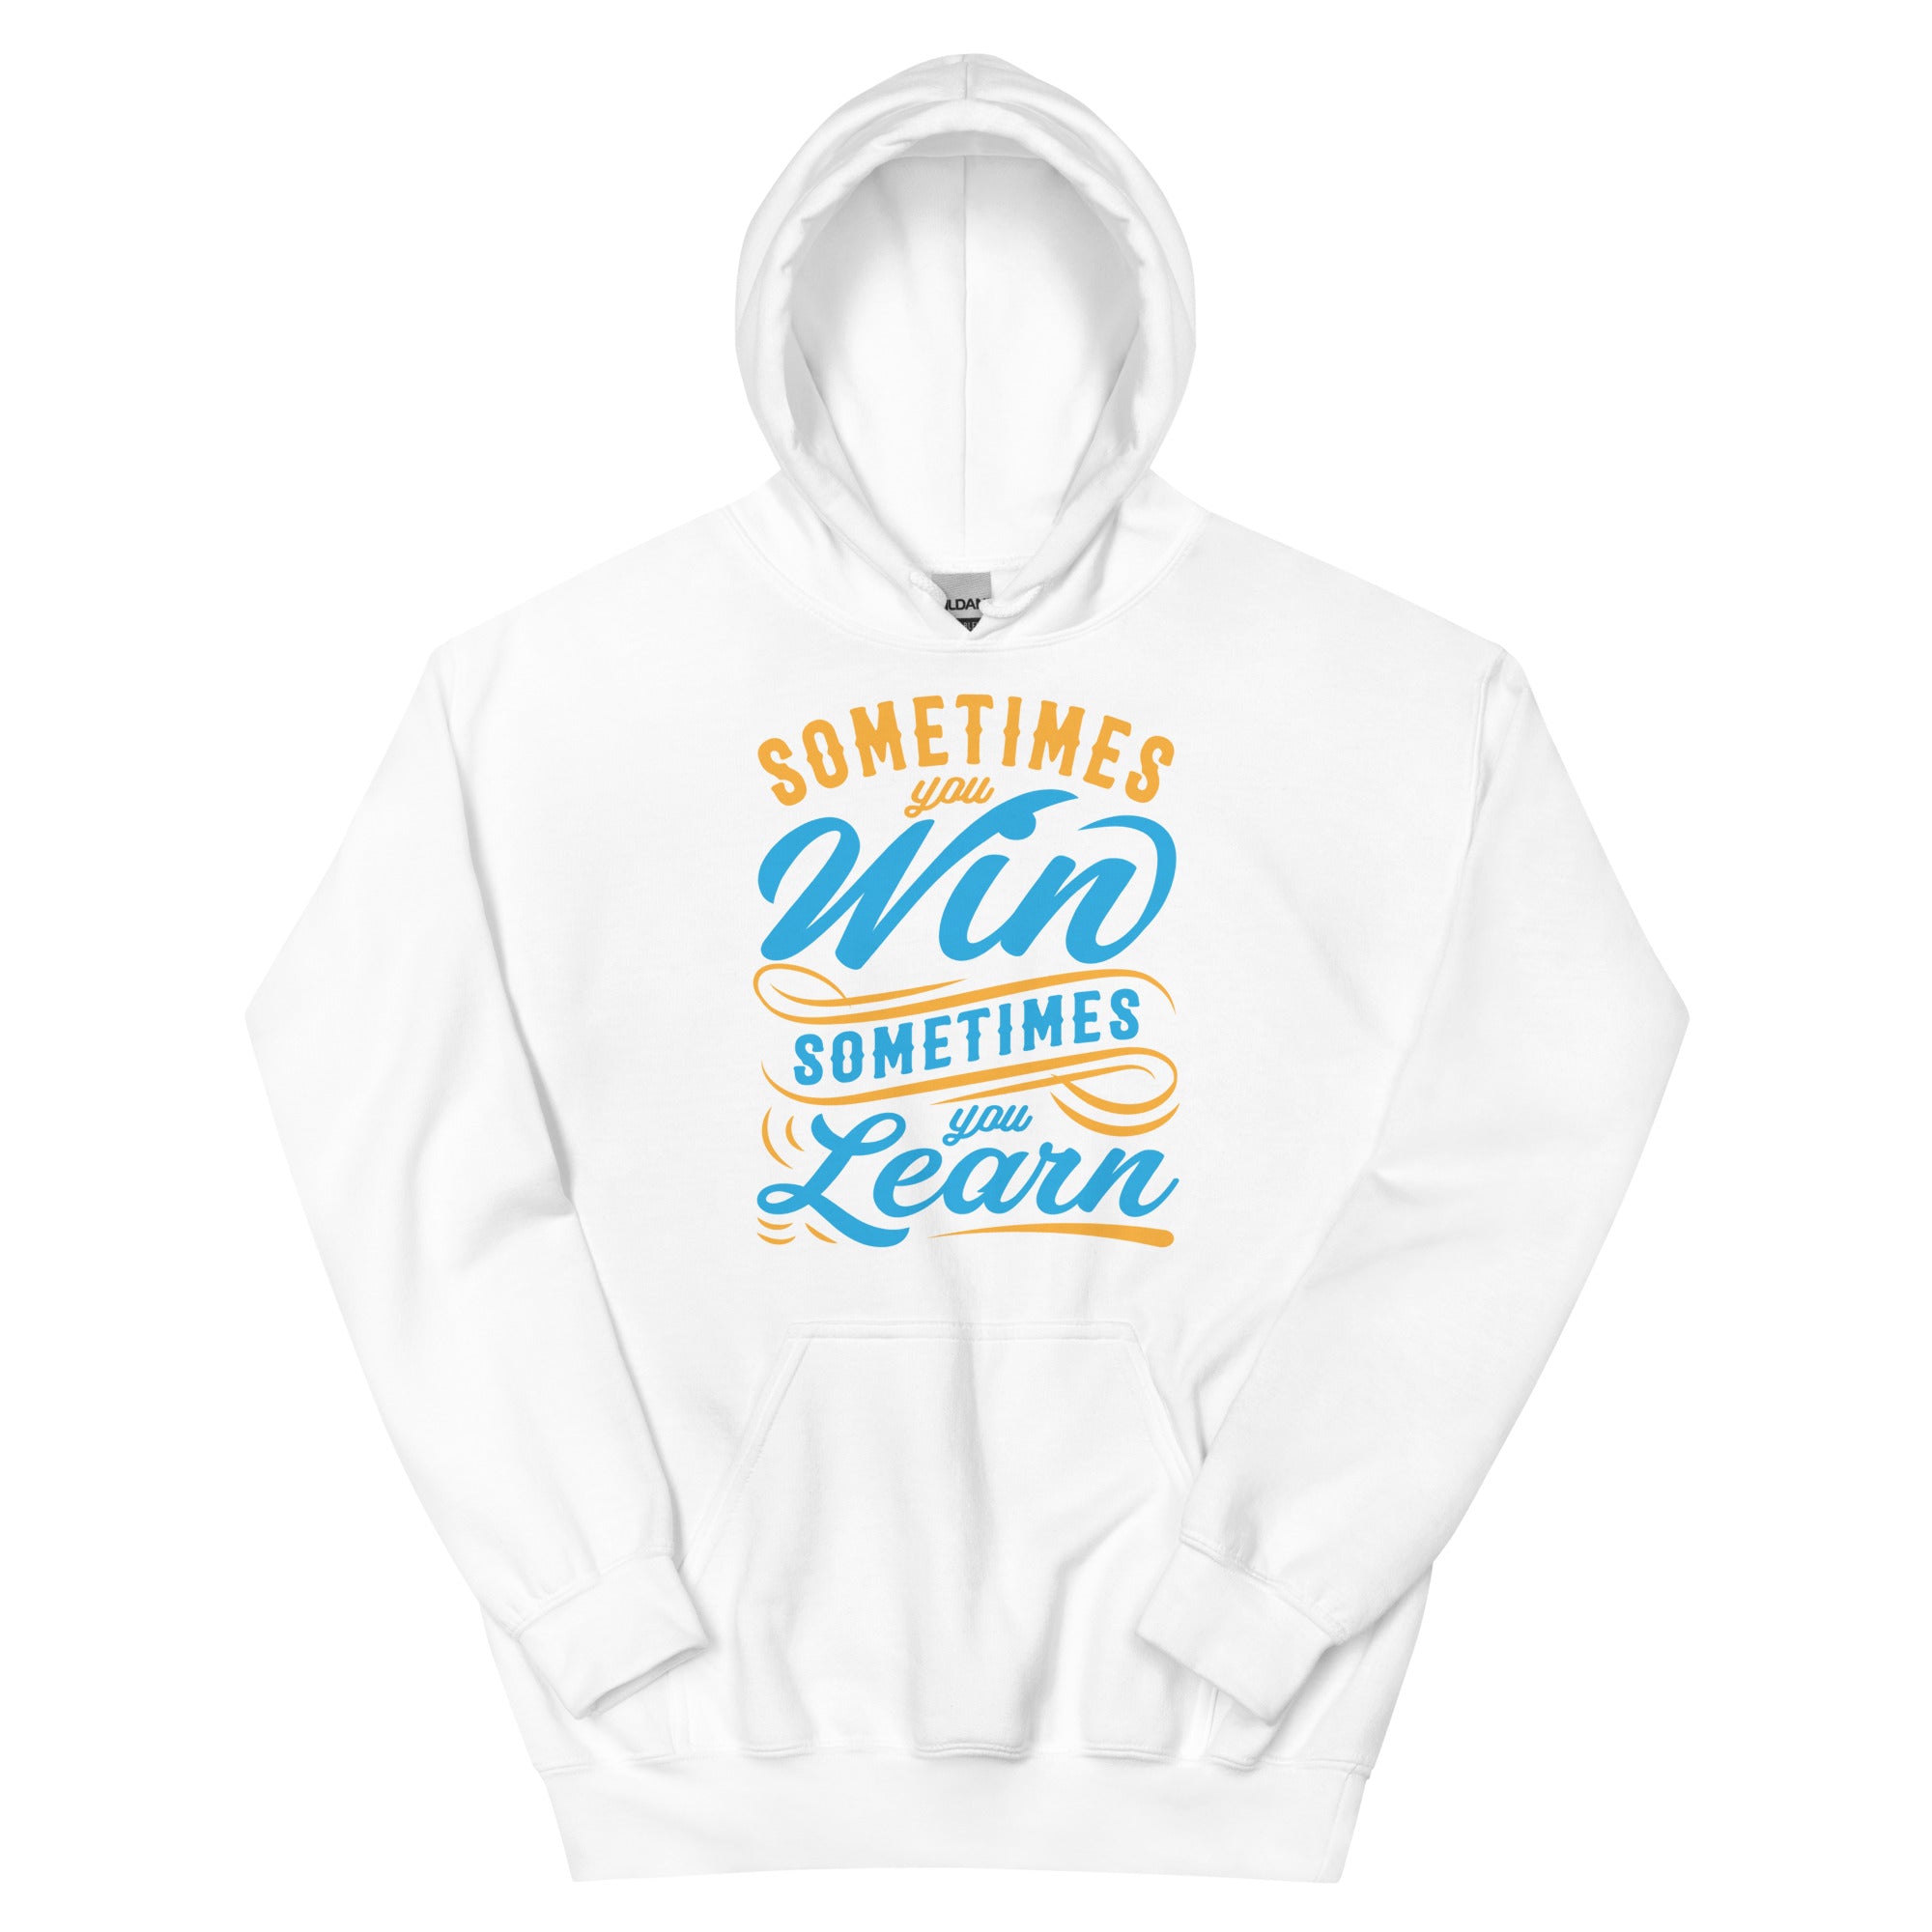 Sometimes You Win, Sometimes You Learn - Unisex Hoodie